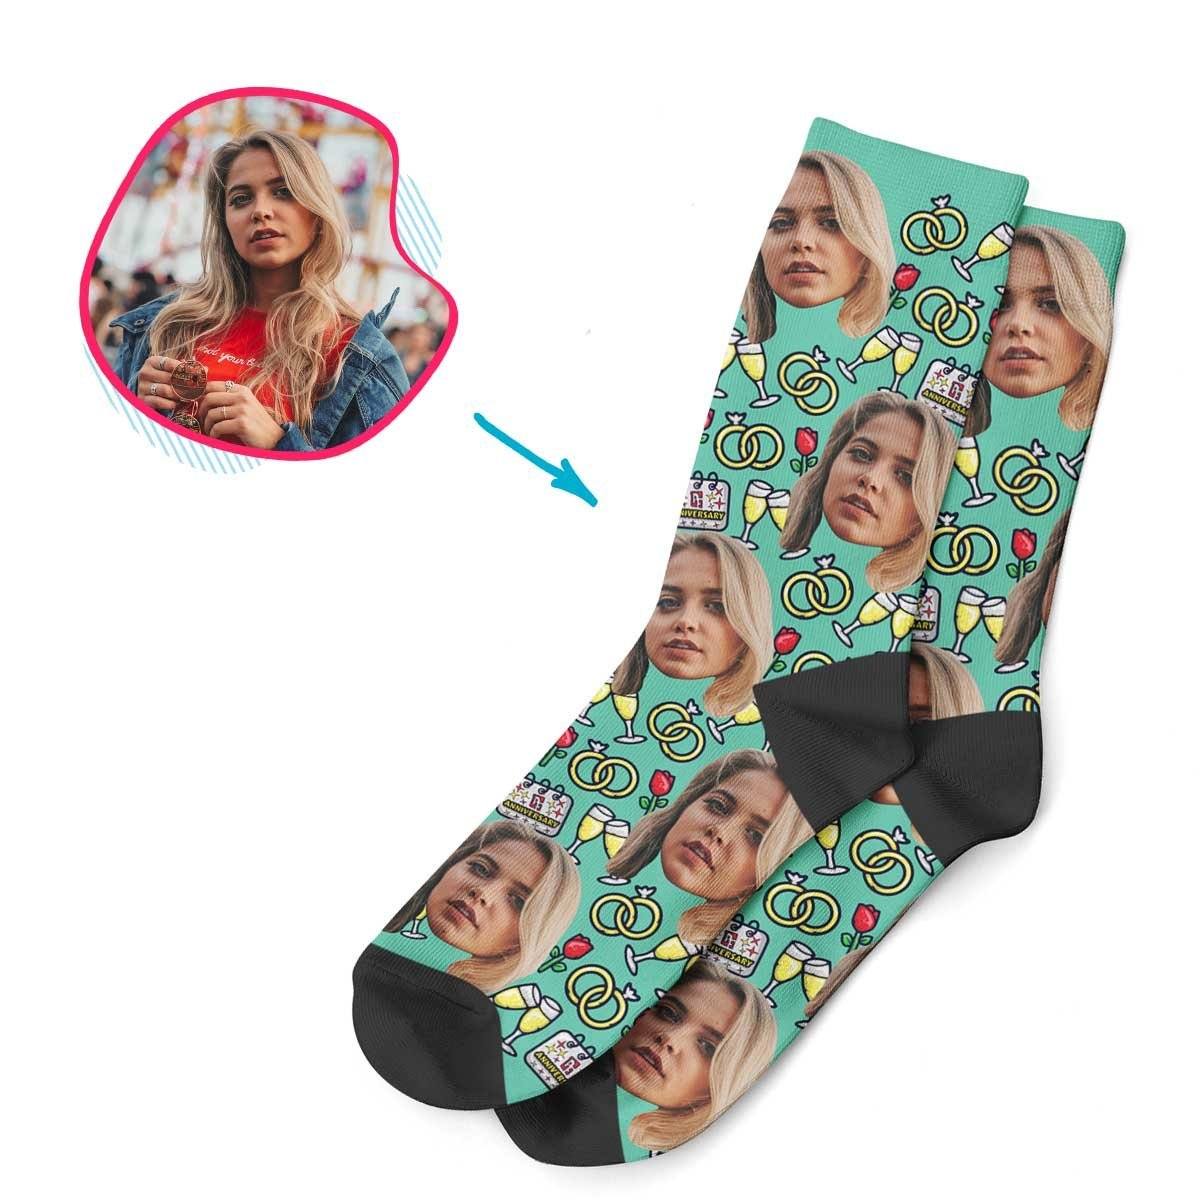 Mint Anniversary personalized socks with photo of face printed on them